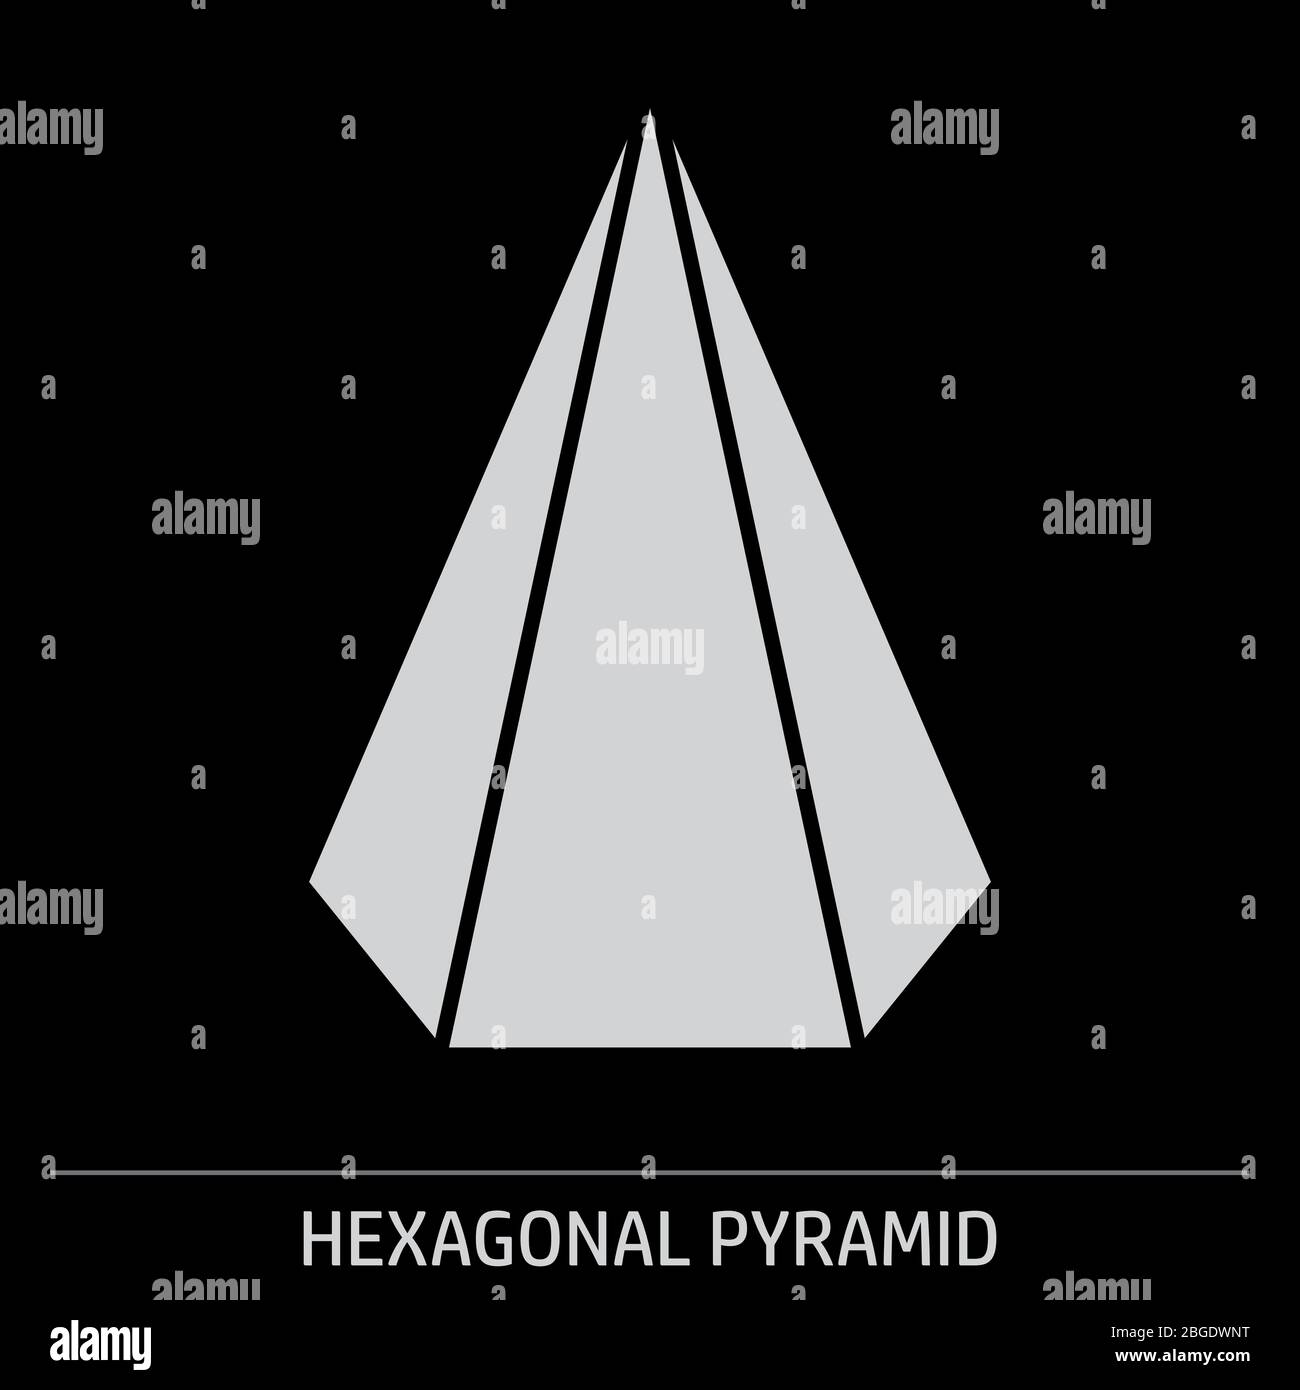 Hexagonal pyramid icon illustration on gray background with label Stock Vector